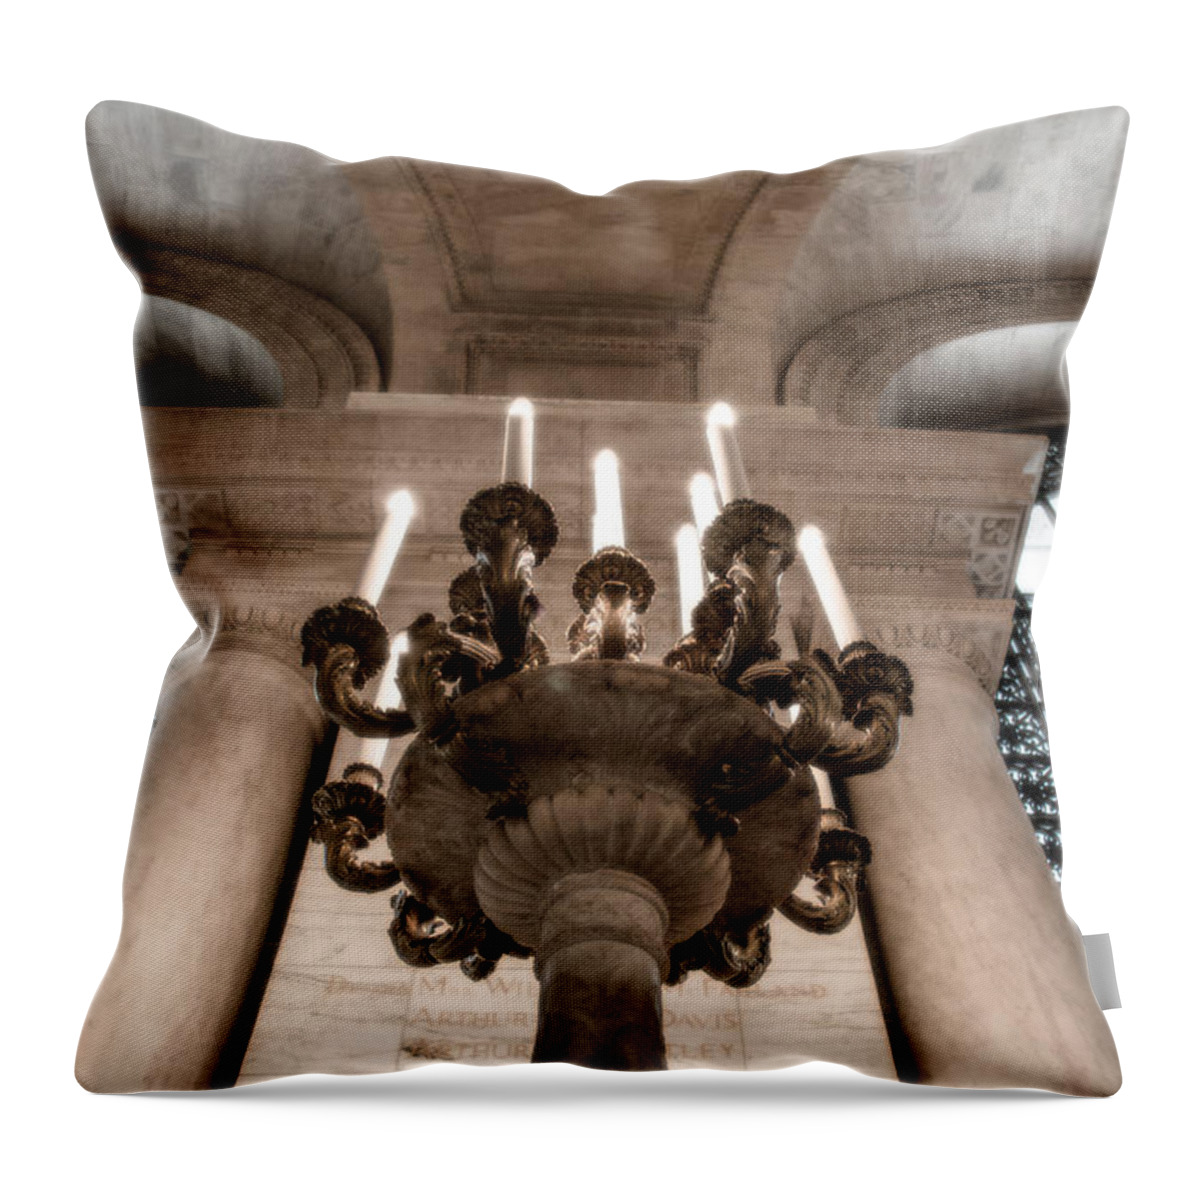 Ny Throw Pillow featuring the photograph NY Public Library Candelabra by Angela DeFrias